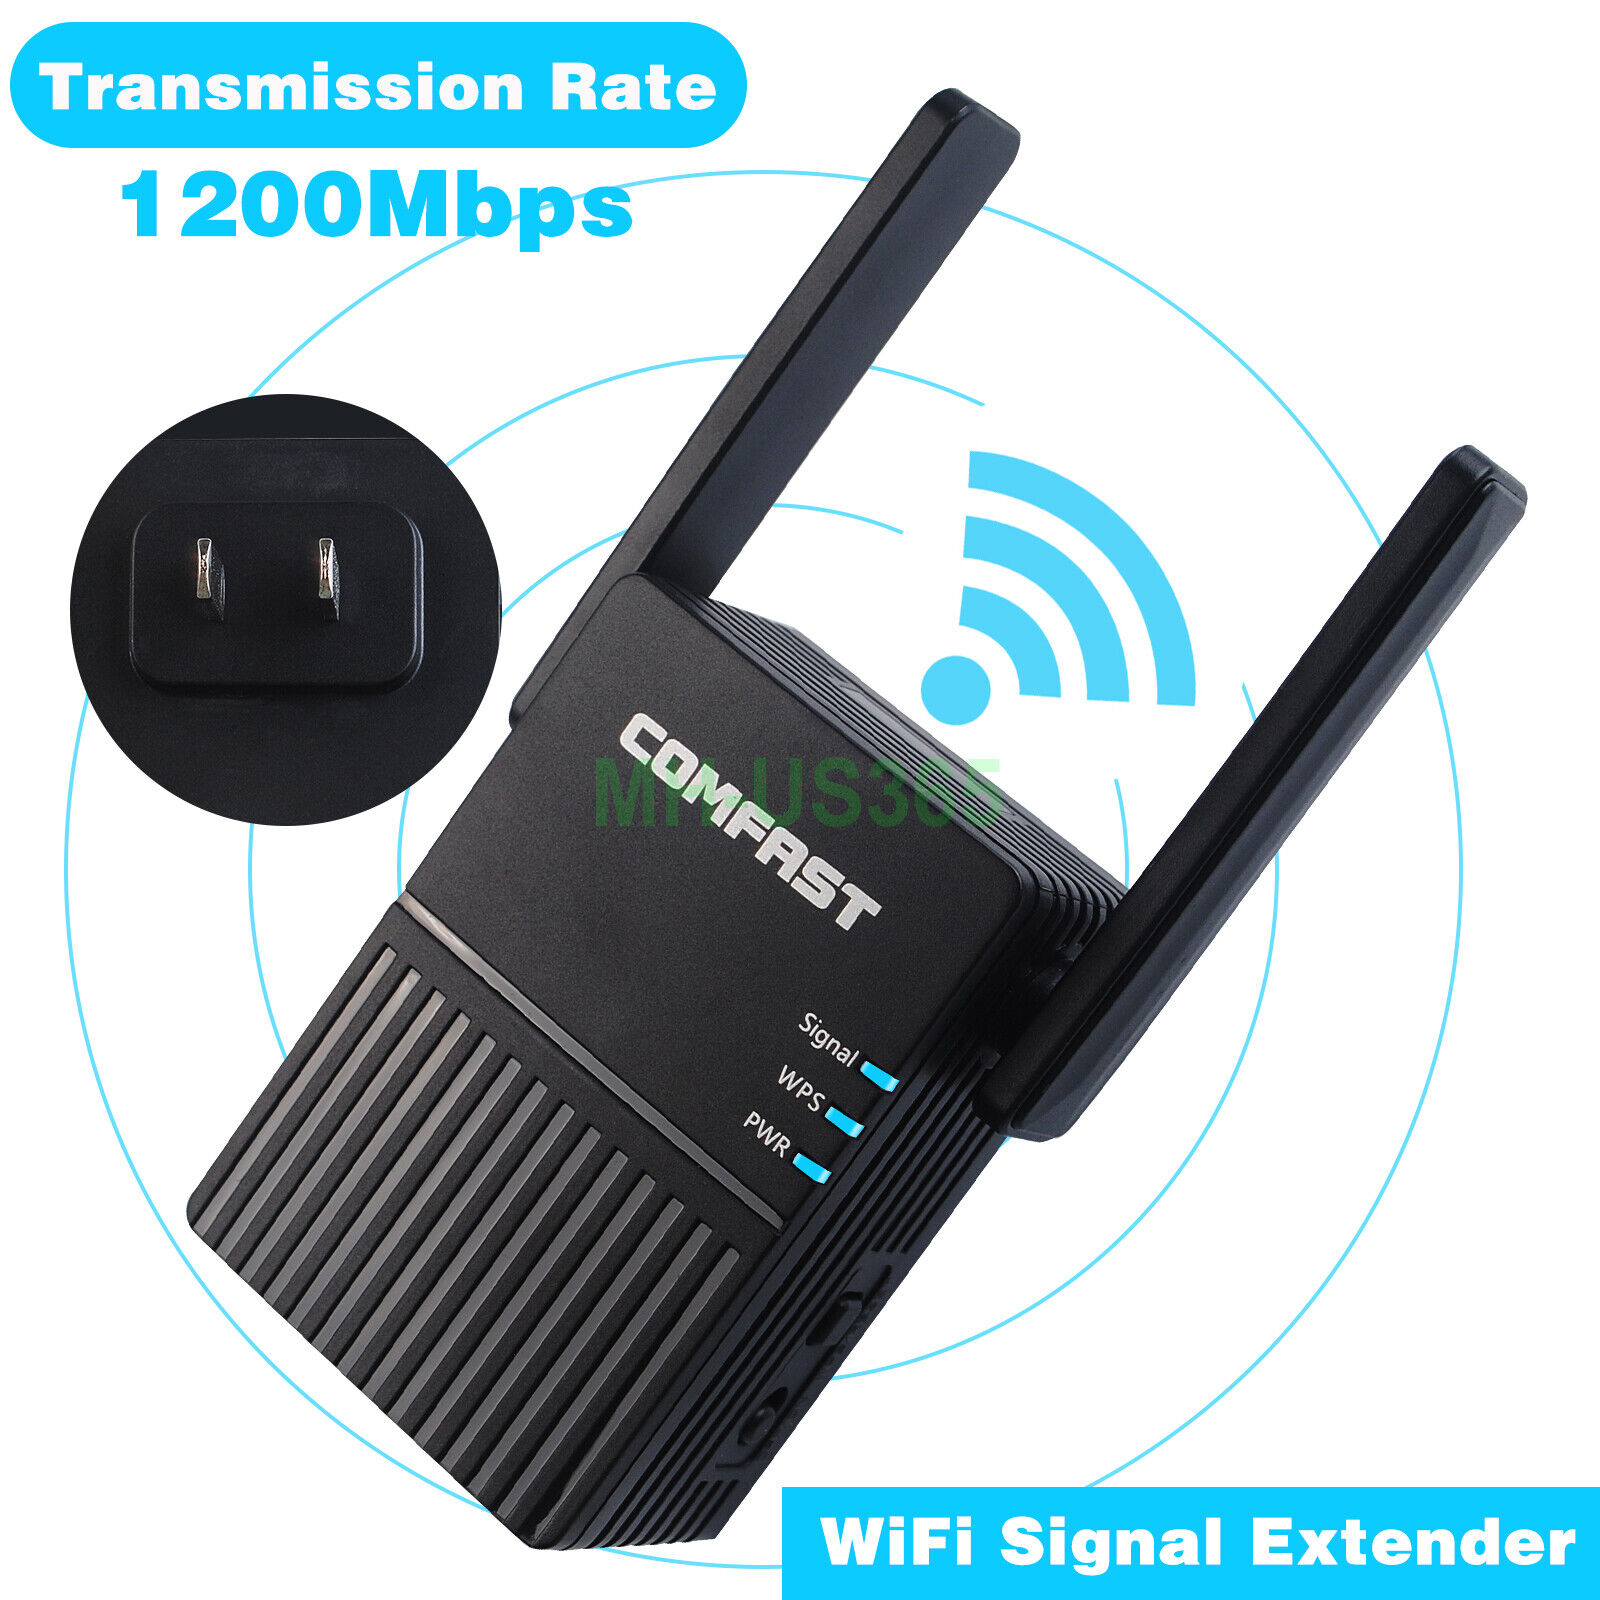 Comfast 1200Mbps WiFi Repeater Dual Band Wireless Extender Amplifier WiFi Router